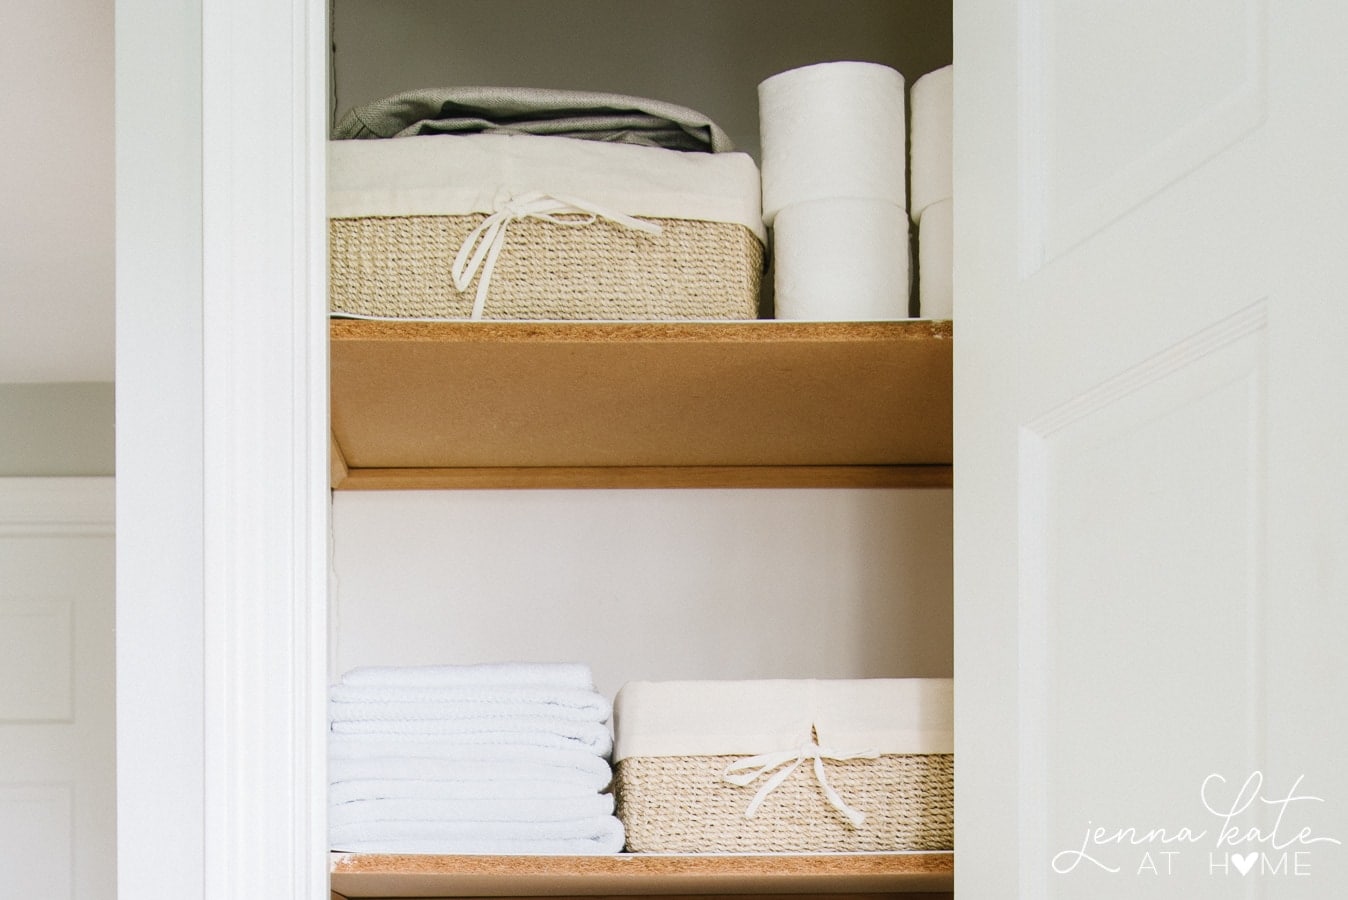 Two closet shelves with beige baskets, stacks of hand towels and rolls of toilet paper